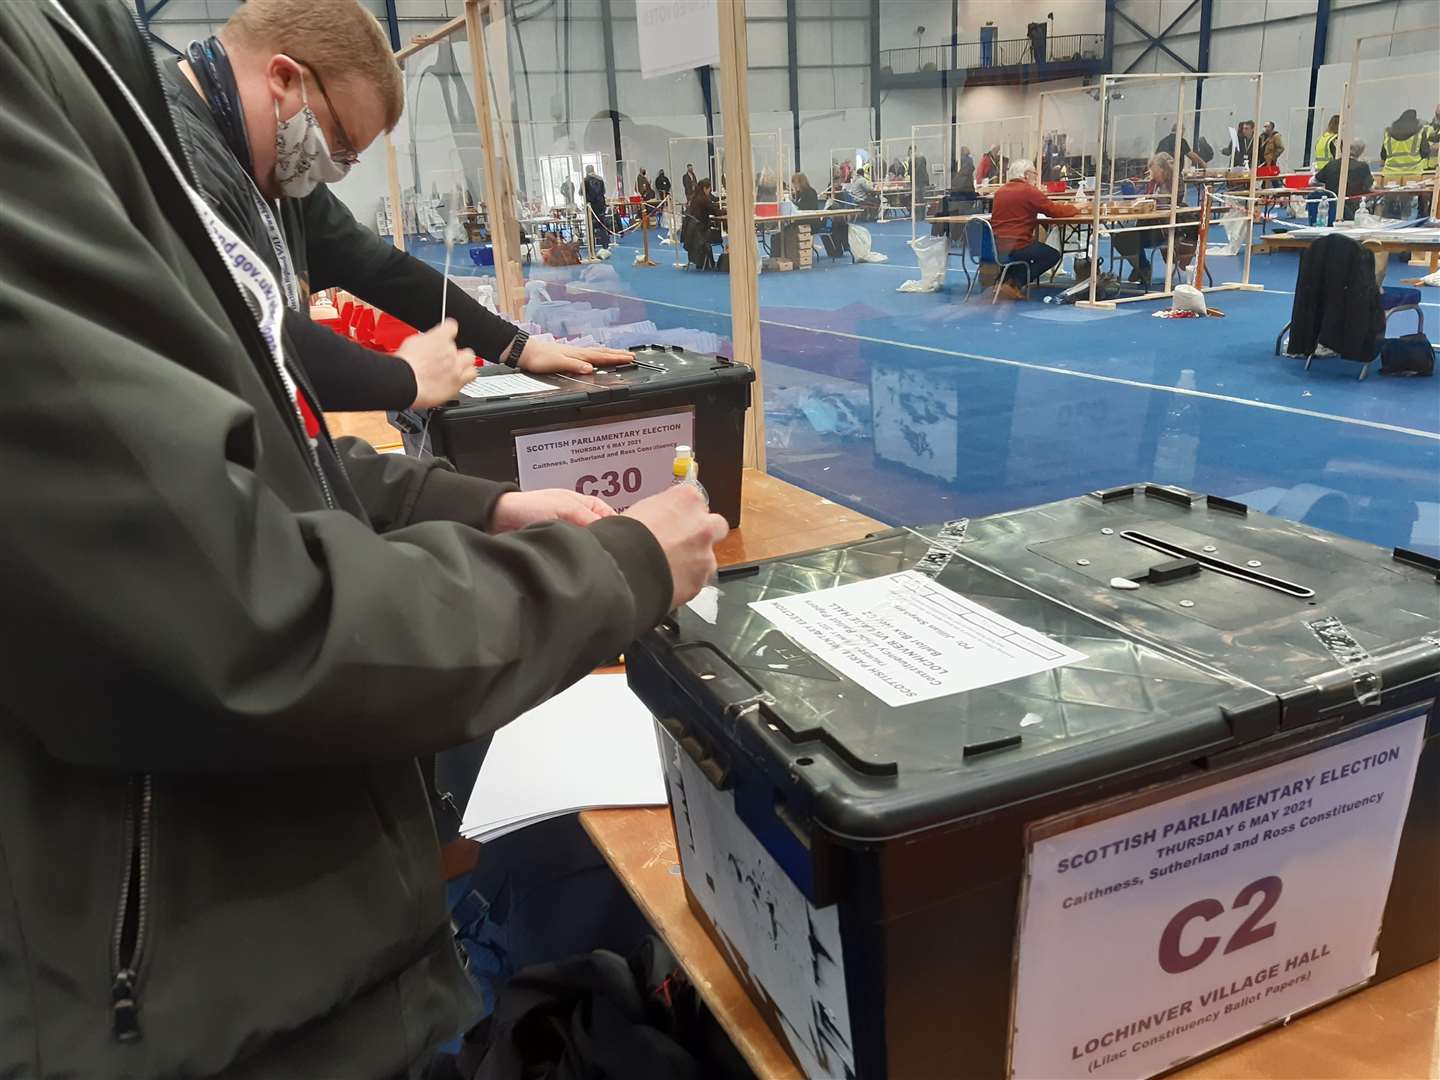 The count for the Caithness, Sutherland and Ross seat takes place at the Highland Football Academy in Dingwall.